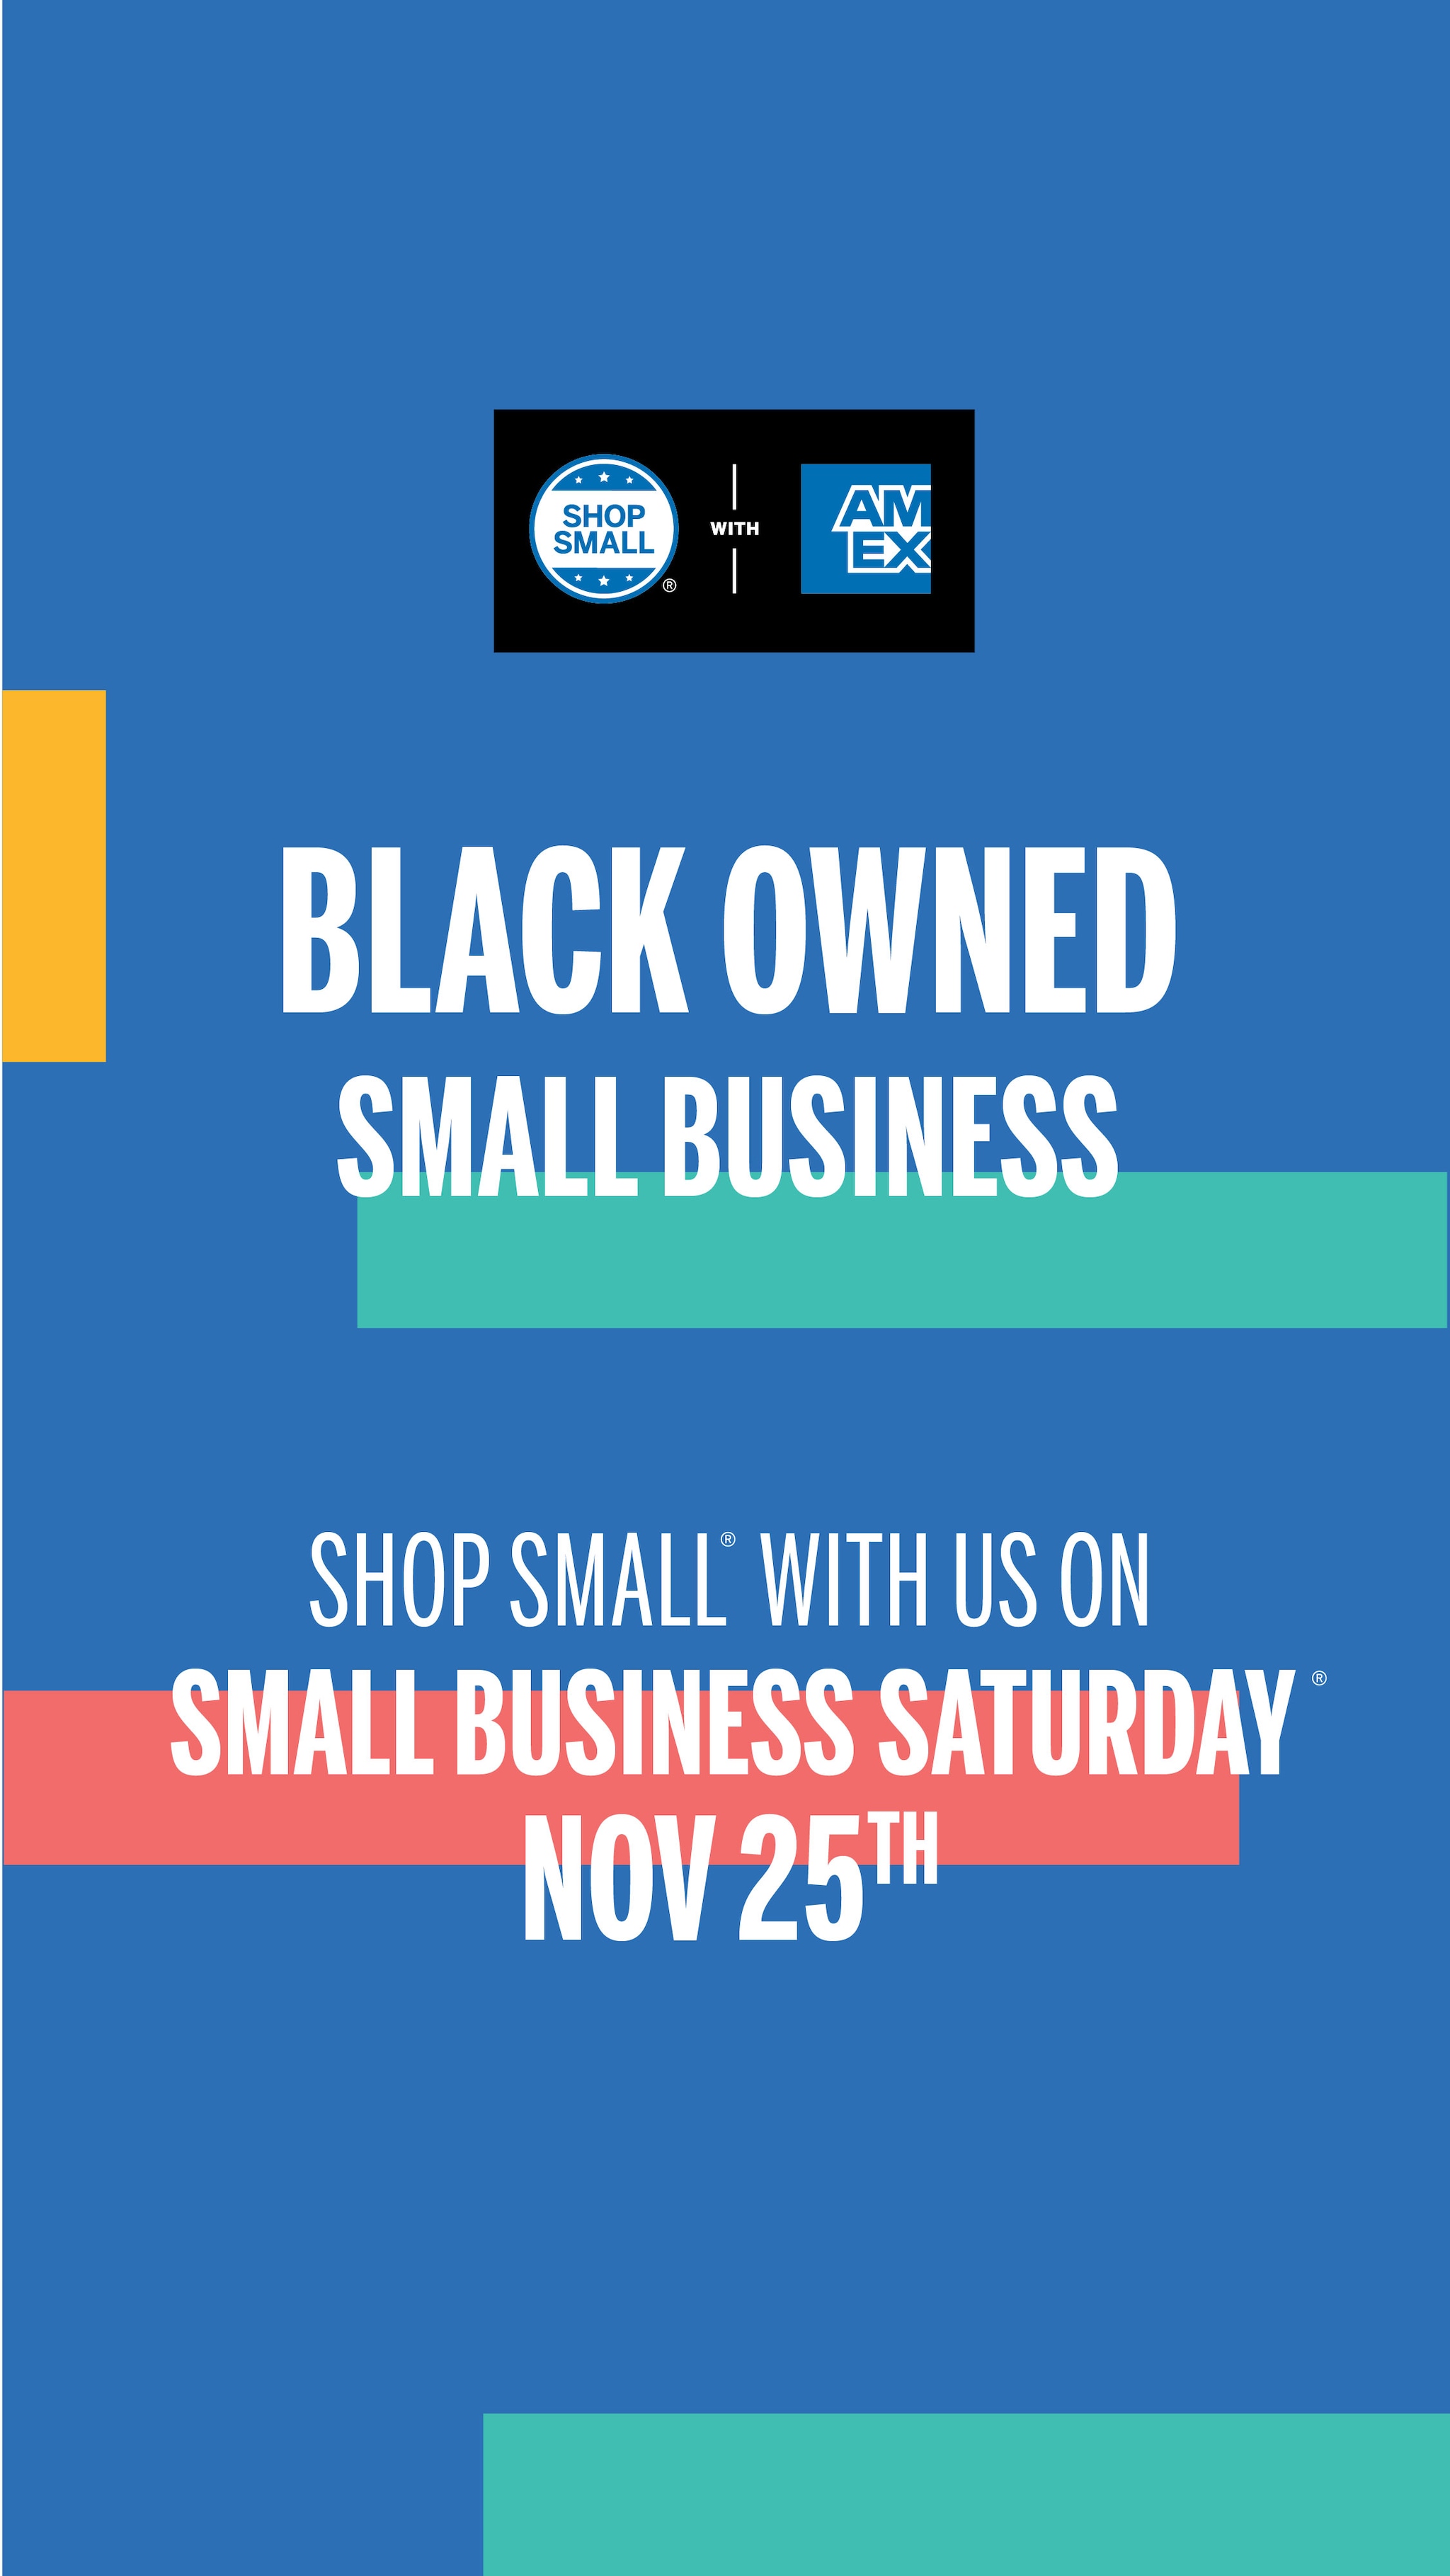 Social Media Story that says Black-Owned Small Business. Shop Small with us on Small Business Saturday Nov 25th.